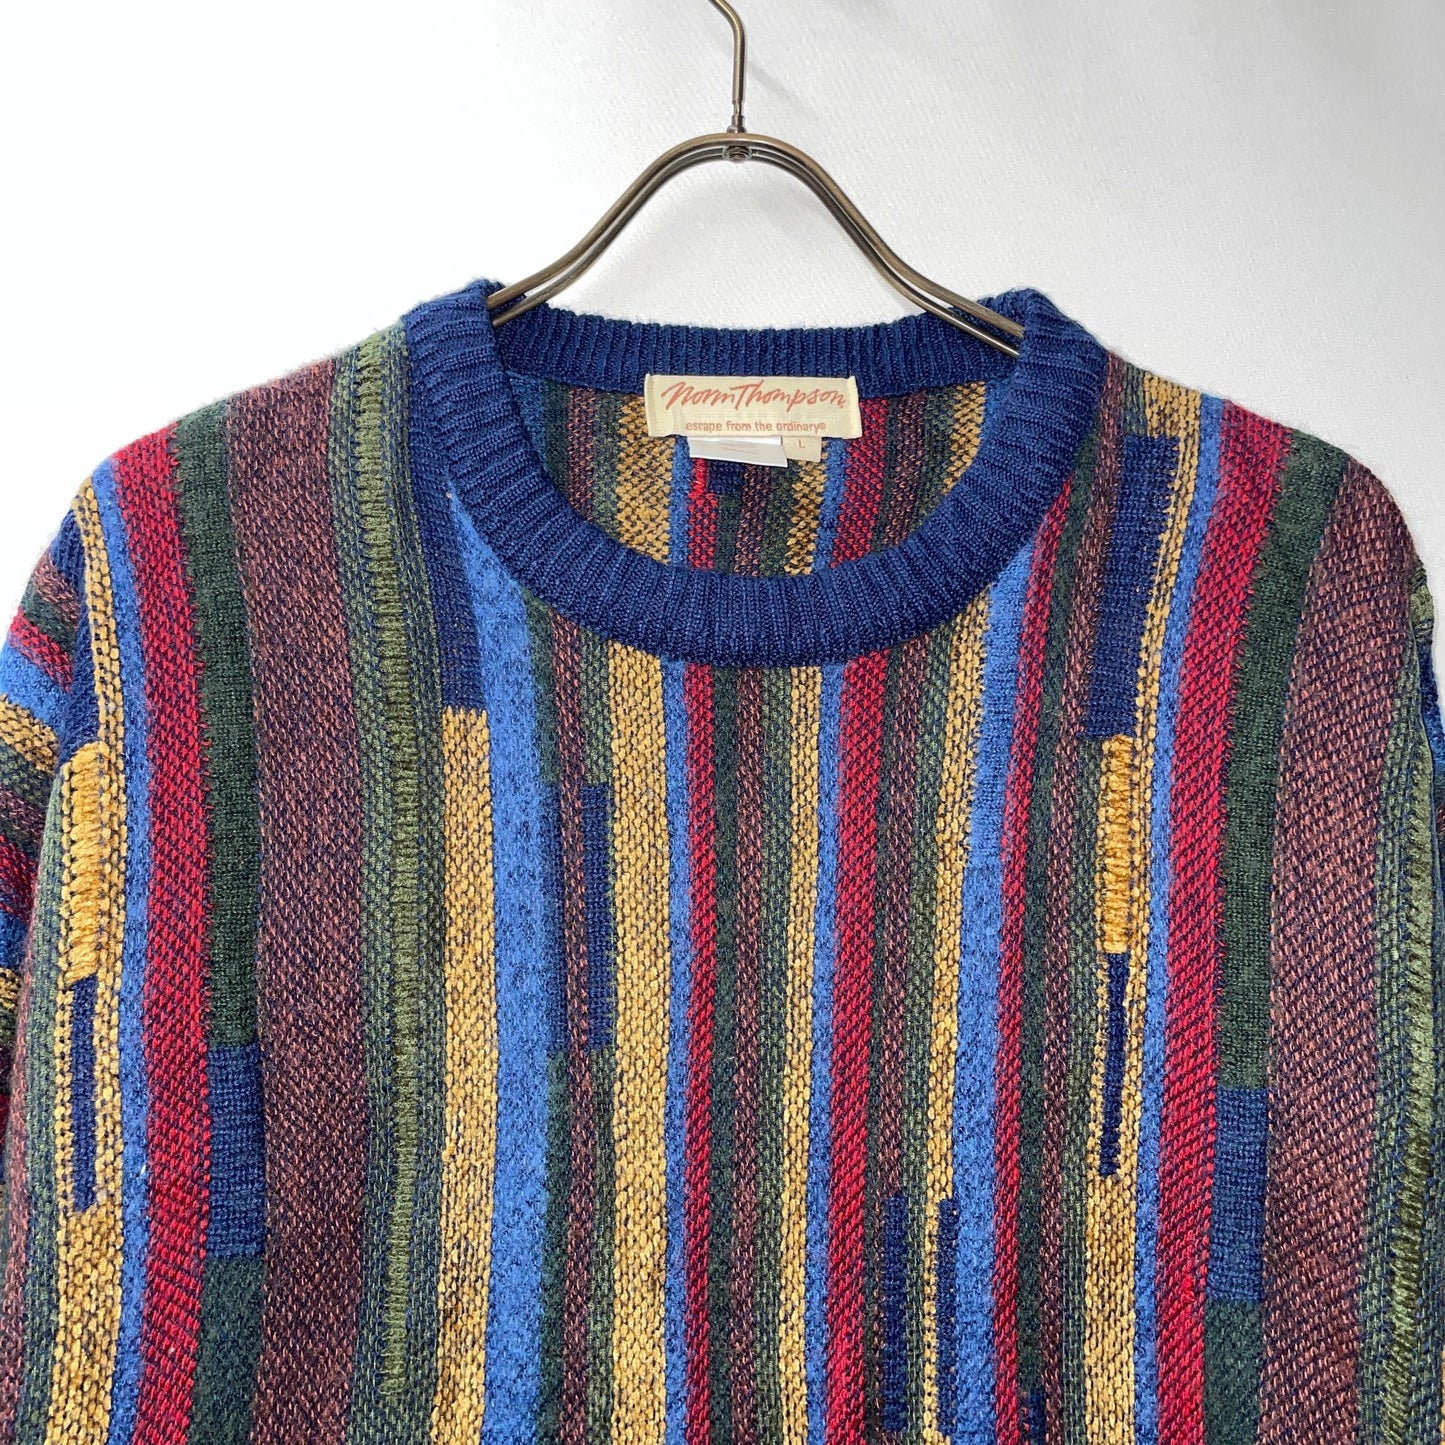 norm thompson knit knit/sweater